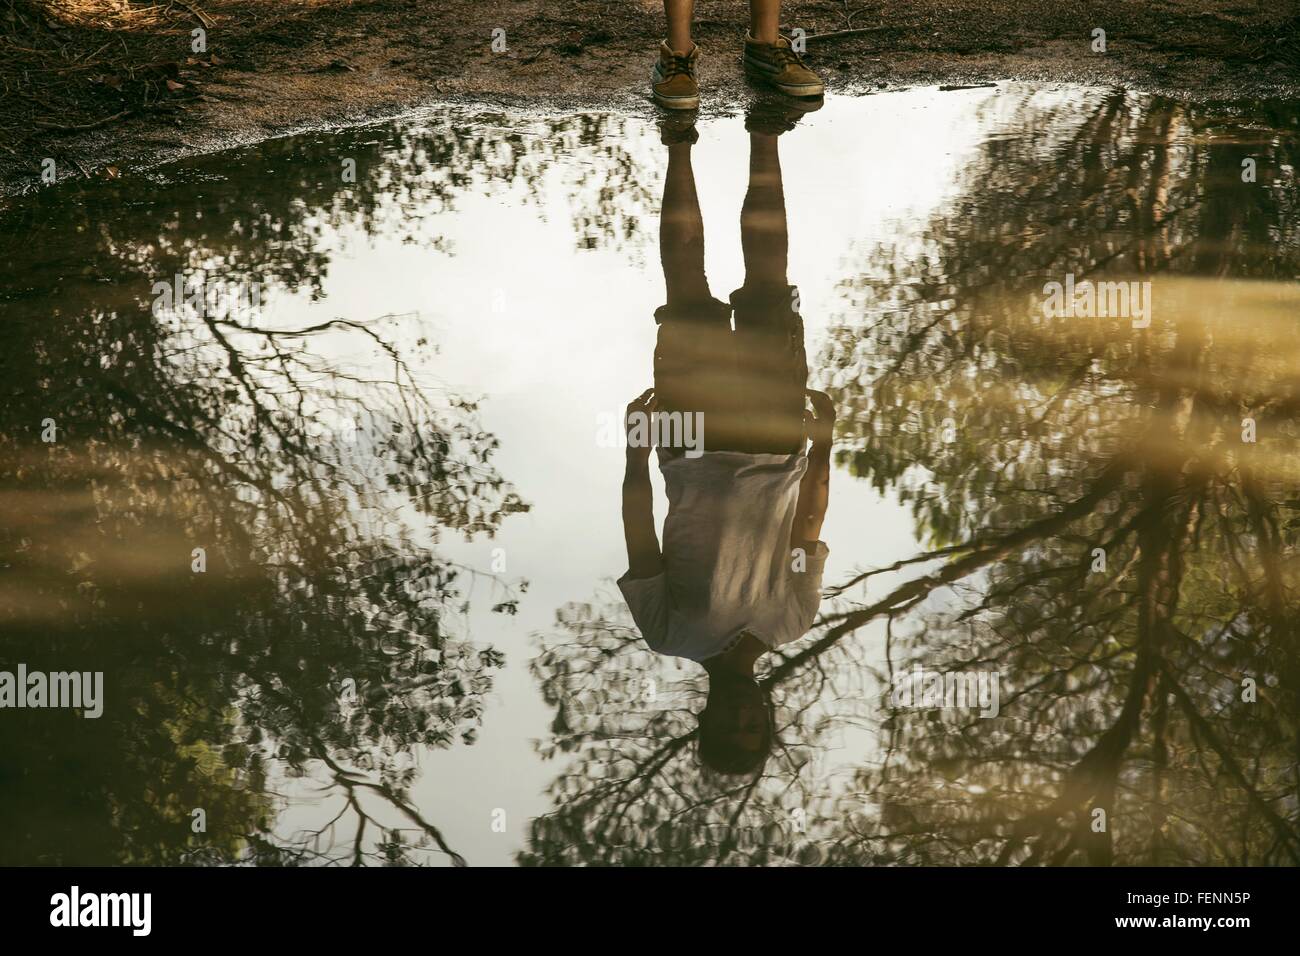 Full length reflection of young man in puddle, Costa Smeralda, Sardinia, Italy Stock Photo